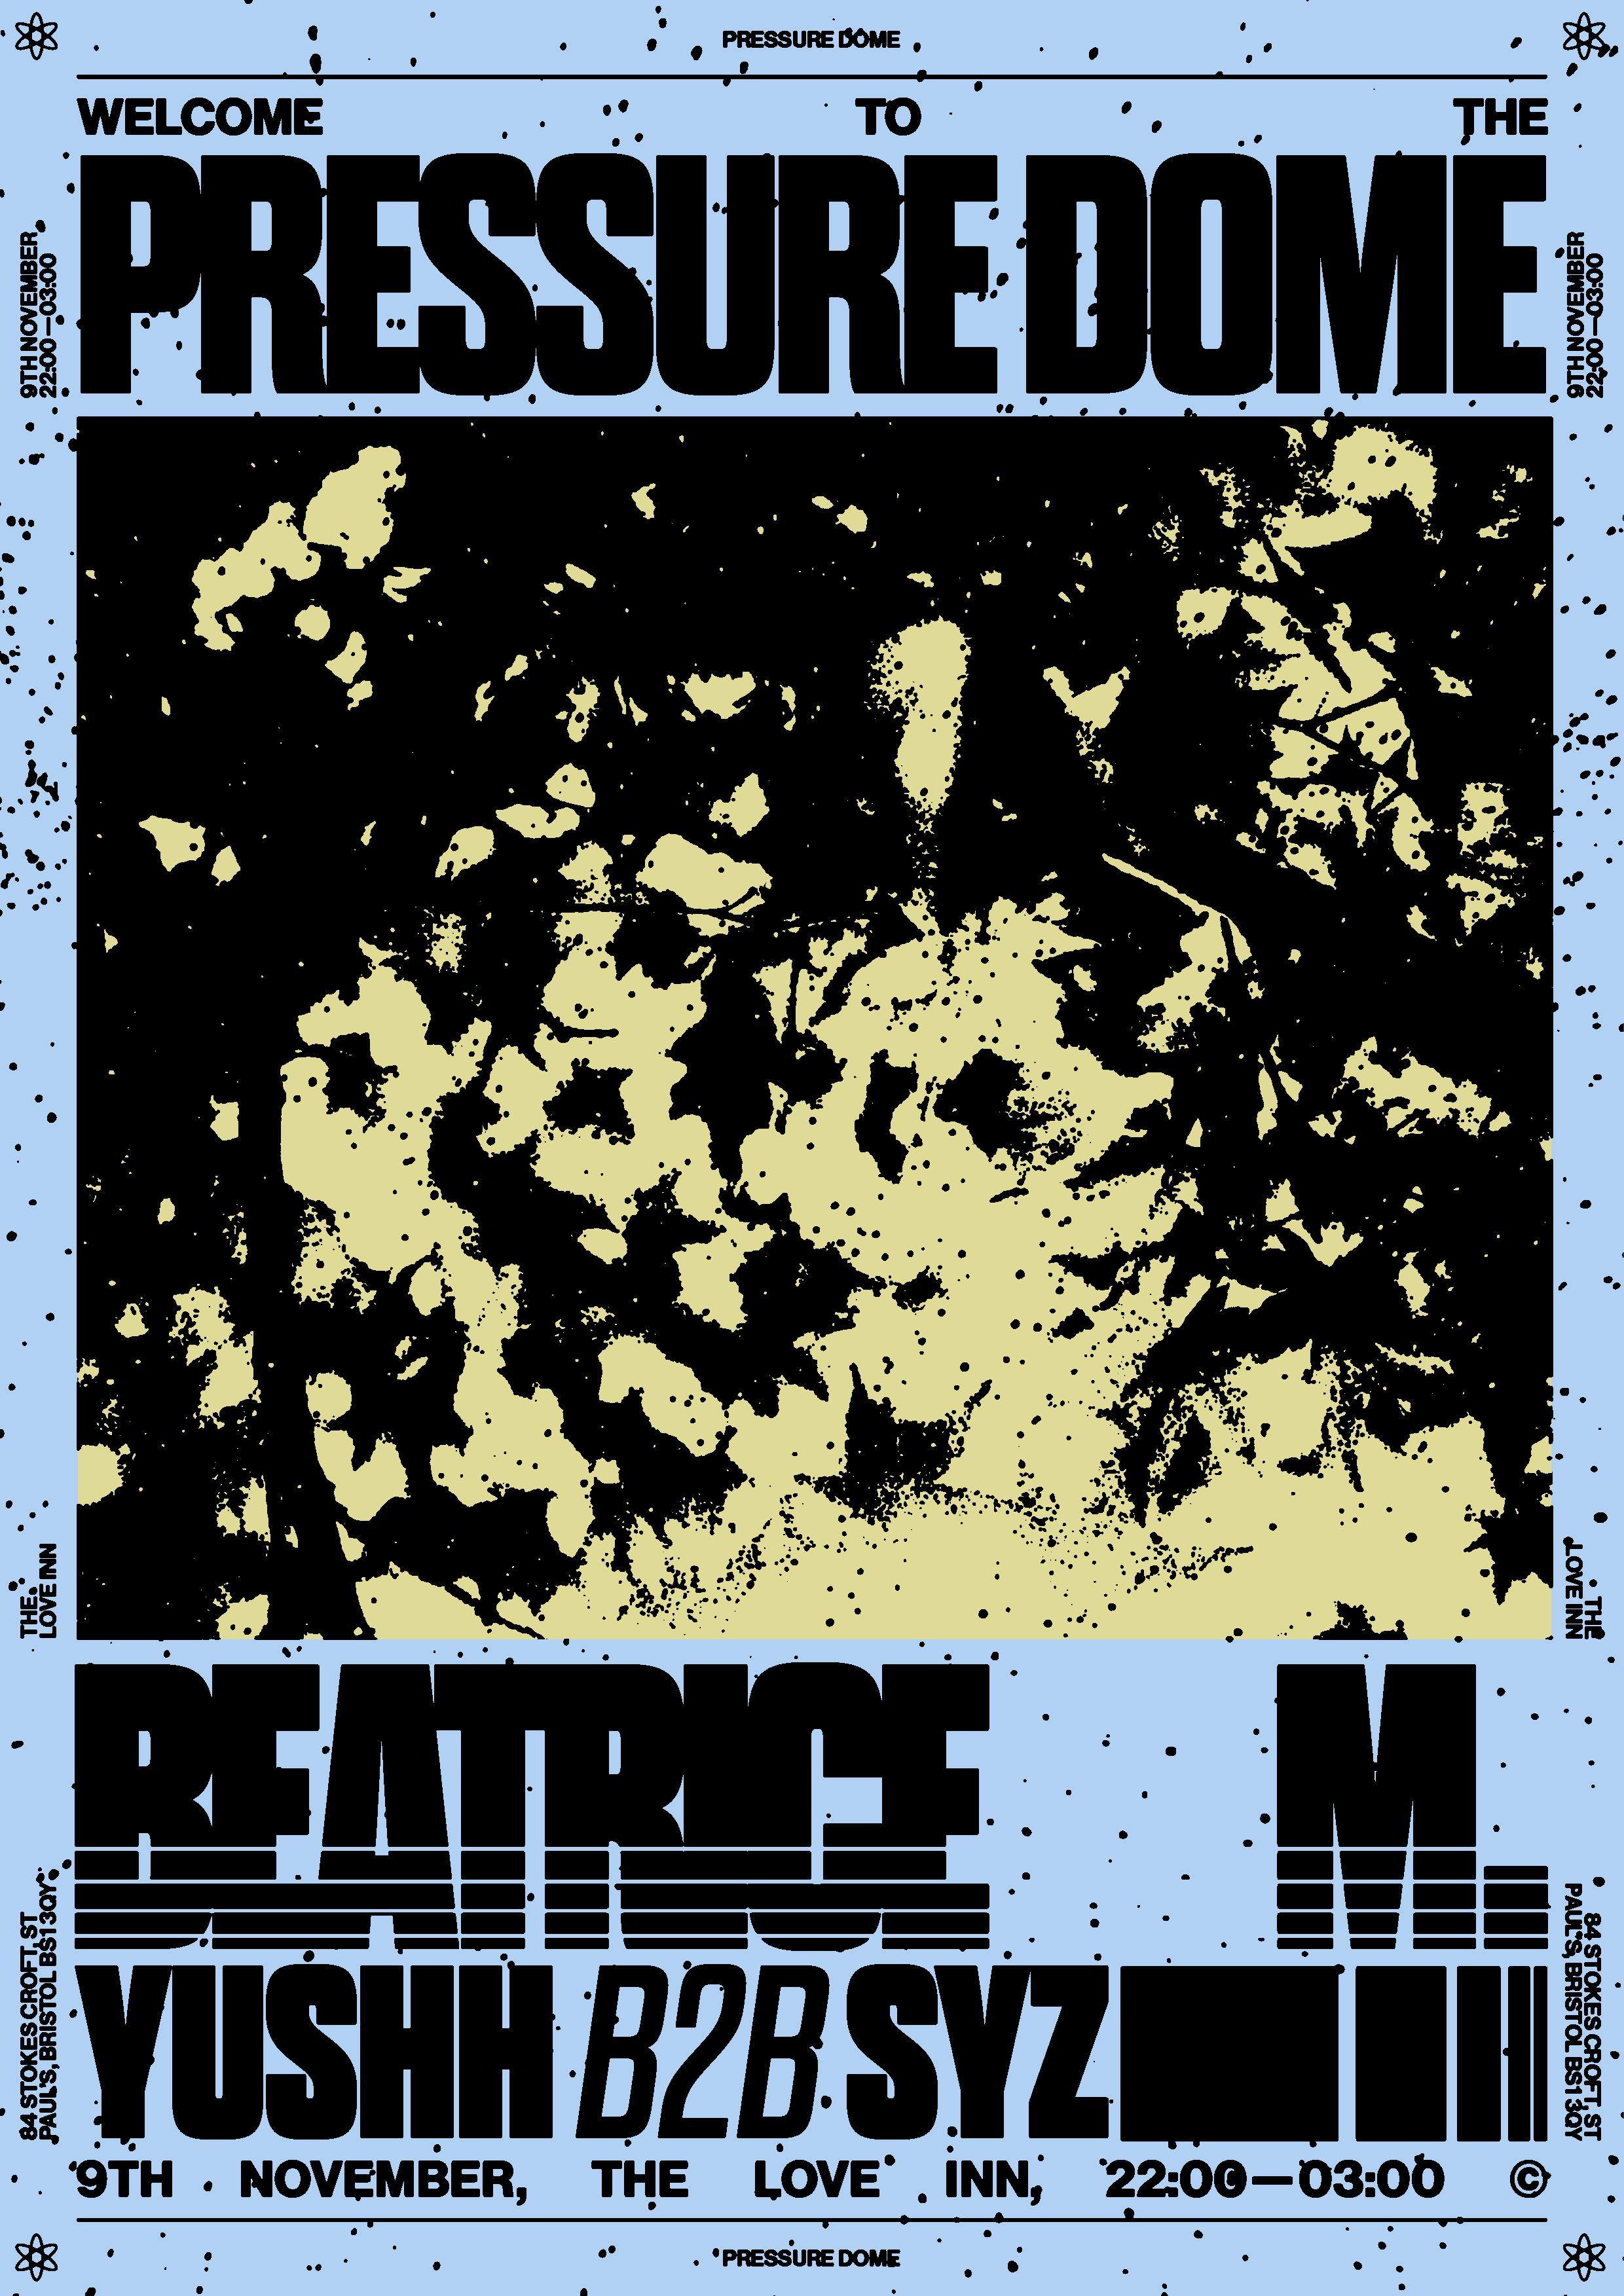 Pressure Dome with Beatrice M - フライヤー表